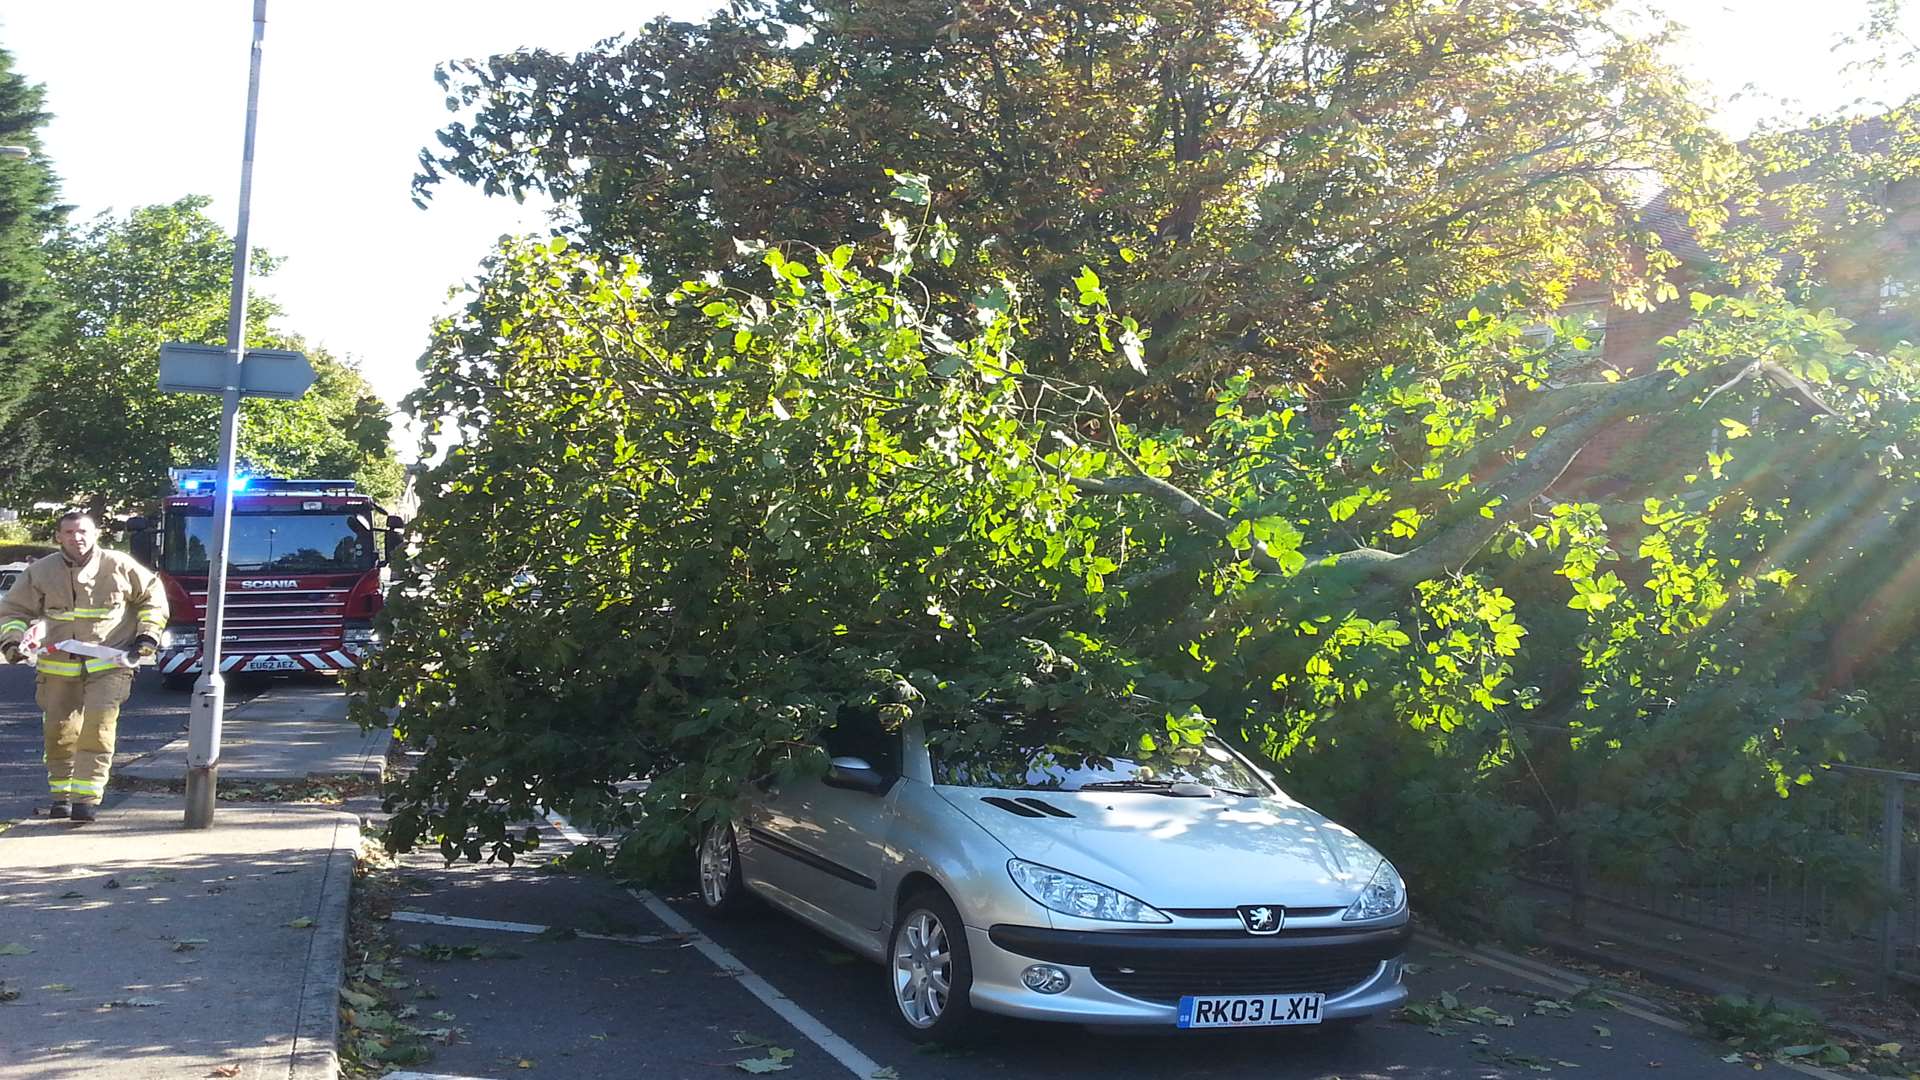 Emergency crews were called to Shorncliffe Road, Folkestone, after this tree fell onto a car